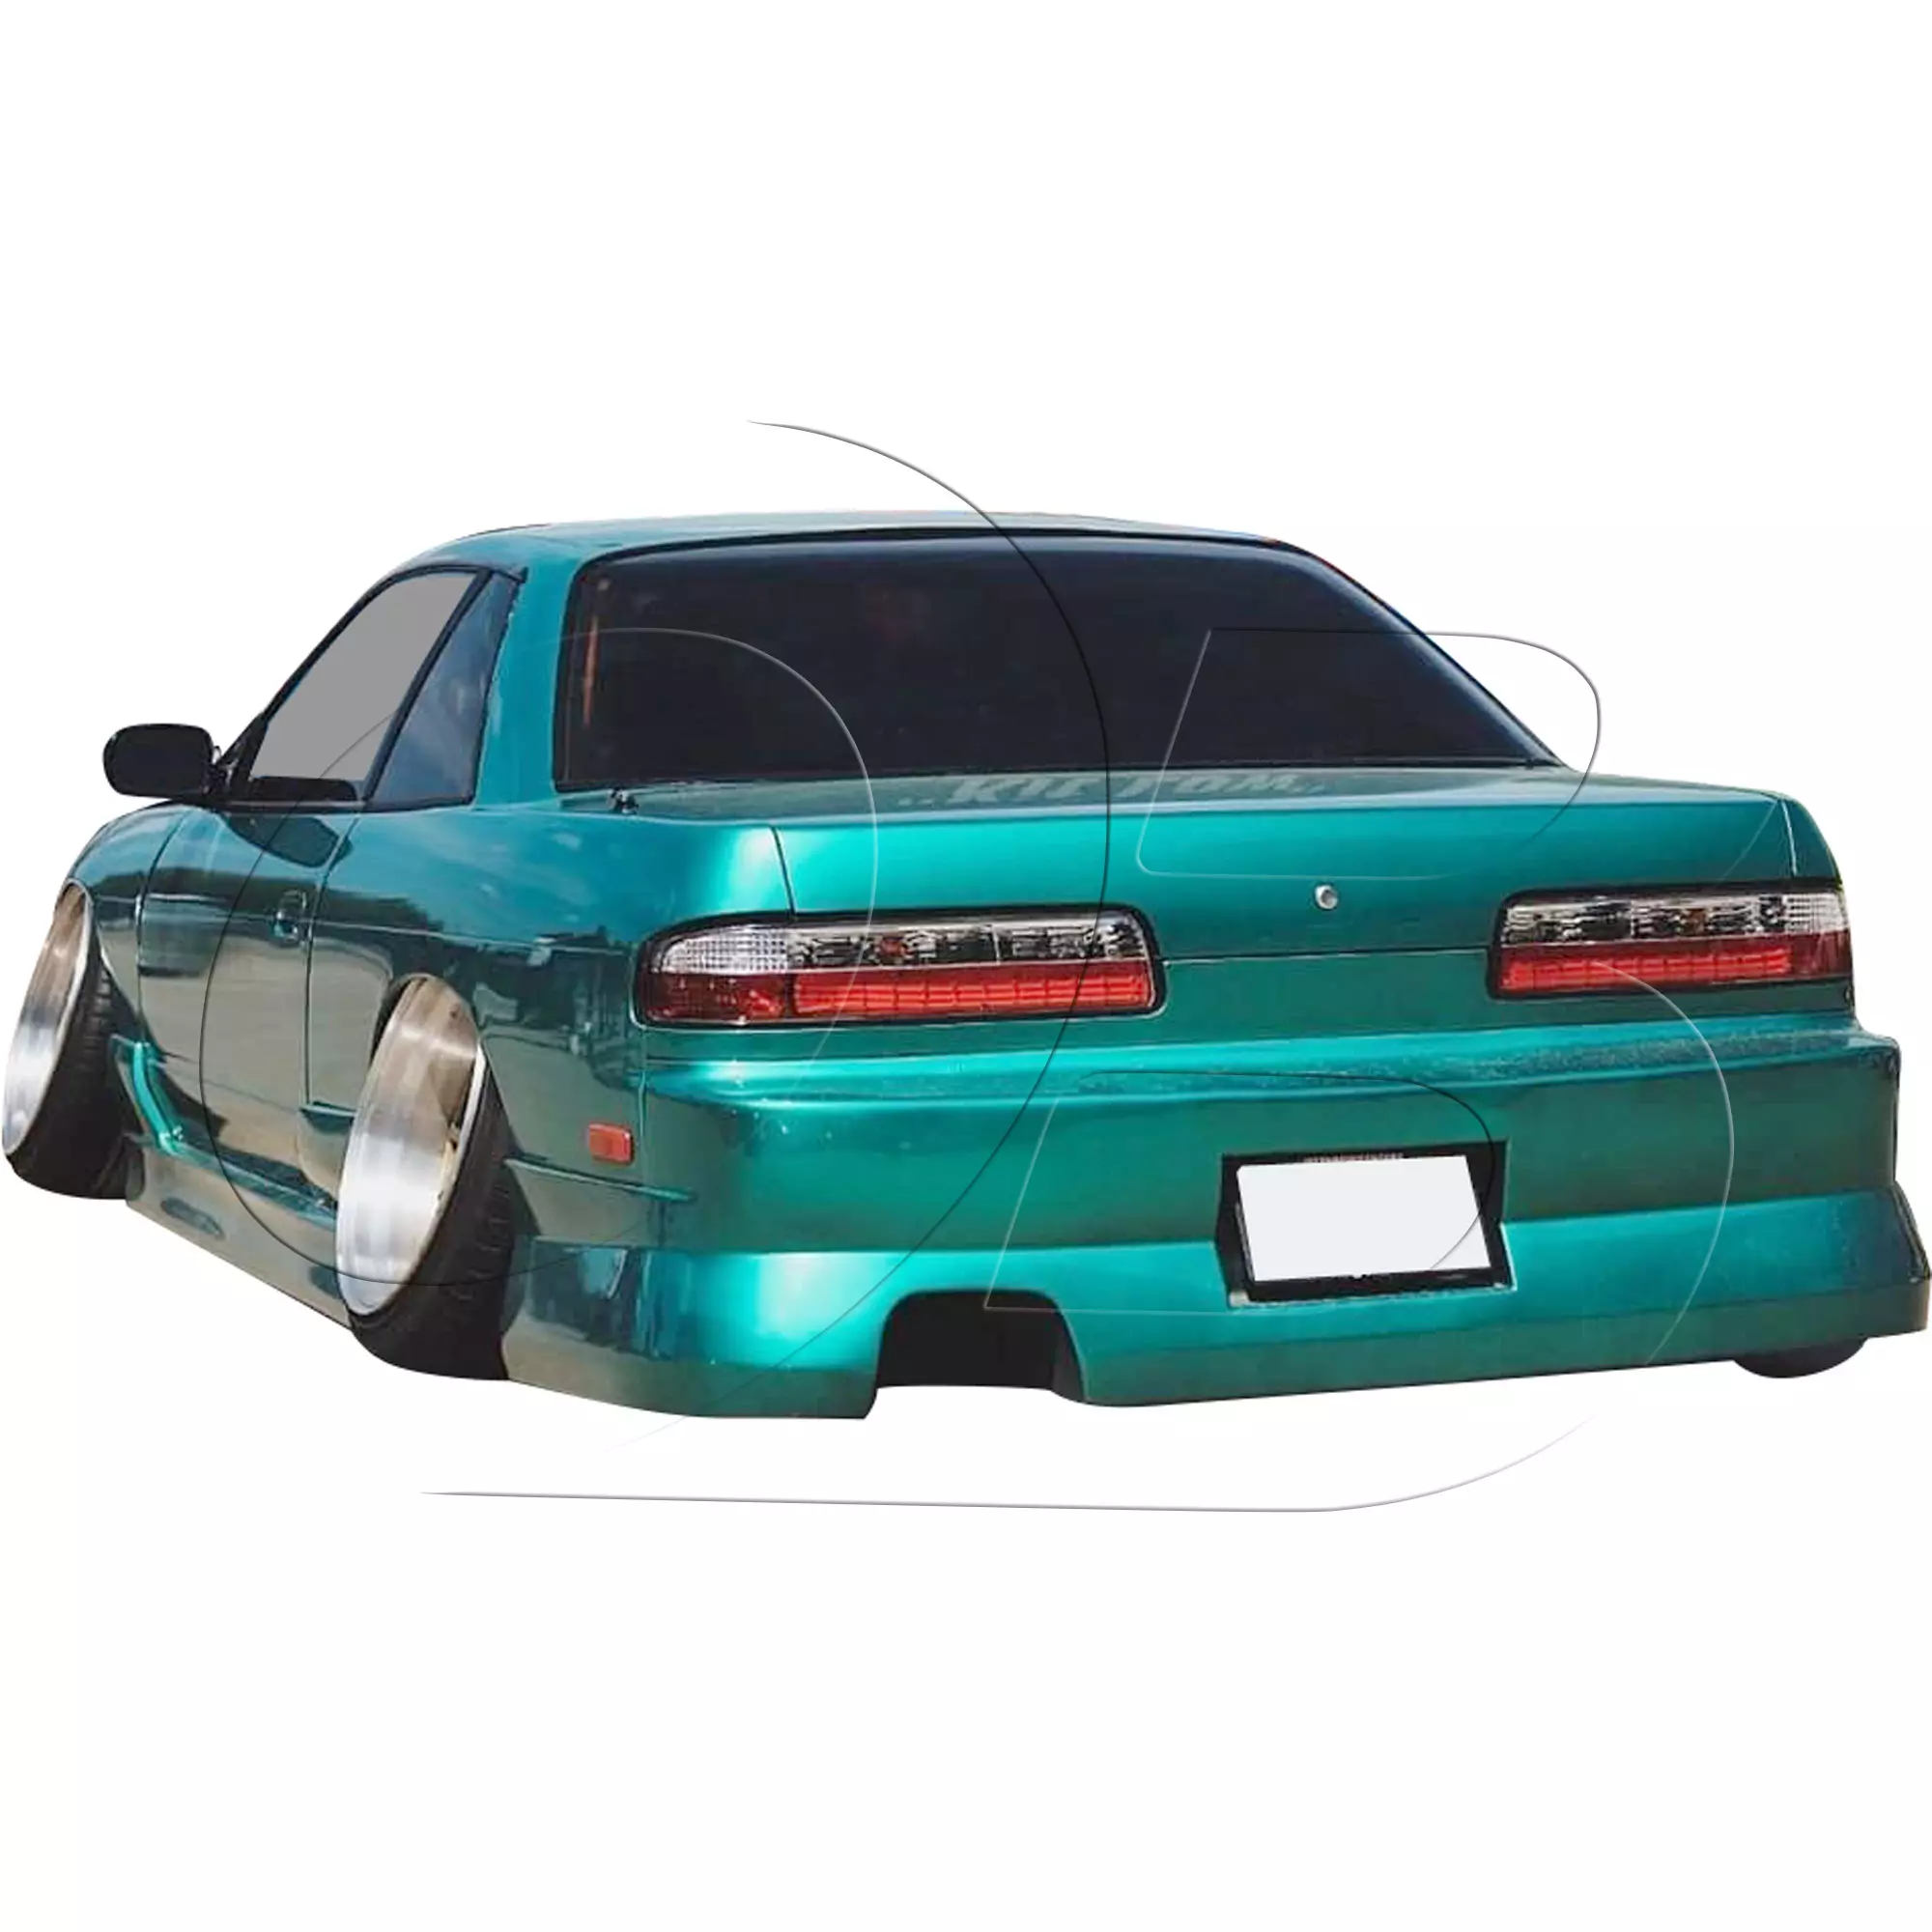 KBD Urethane Bsport2 Style 4pc Full Body Kit > Nissan 240SX 1989-1994 > 2dr Coupe - Image 89